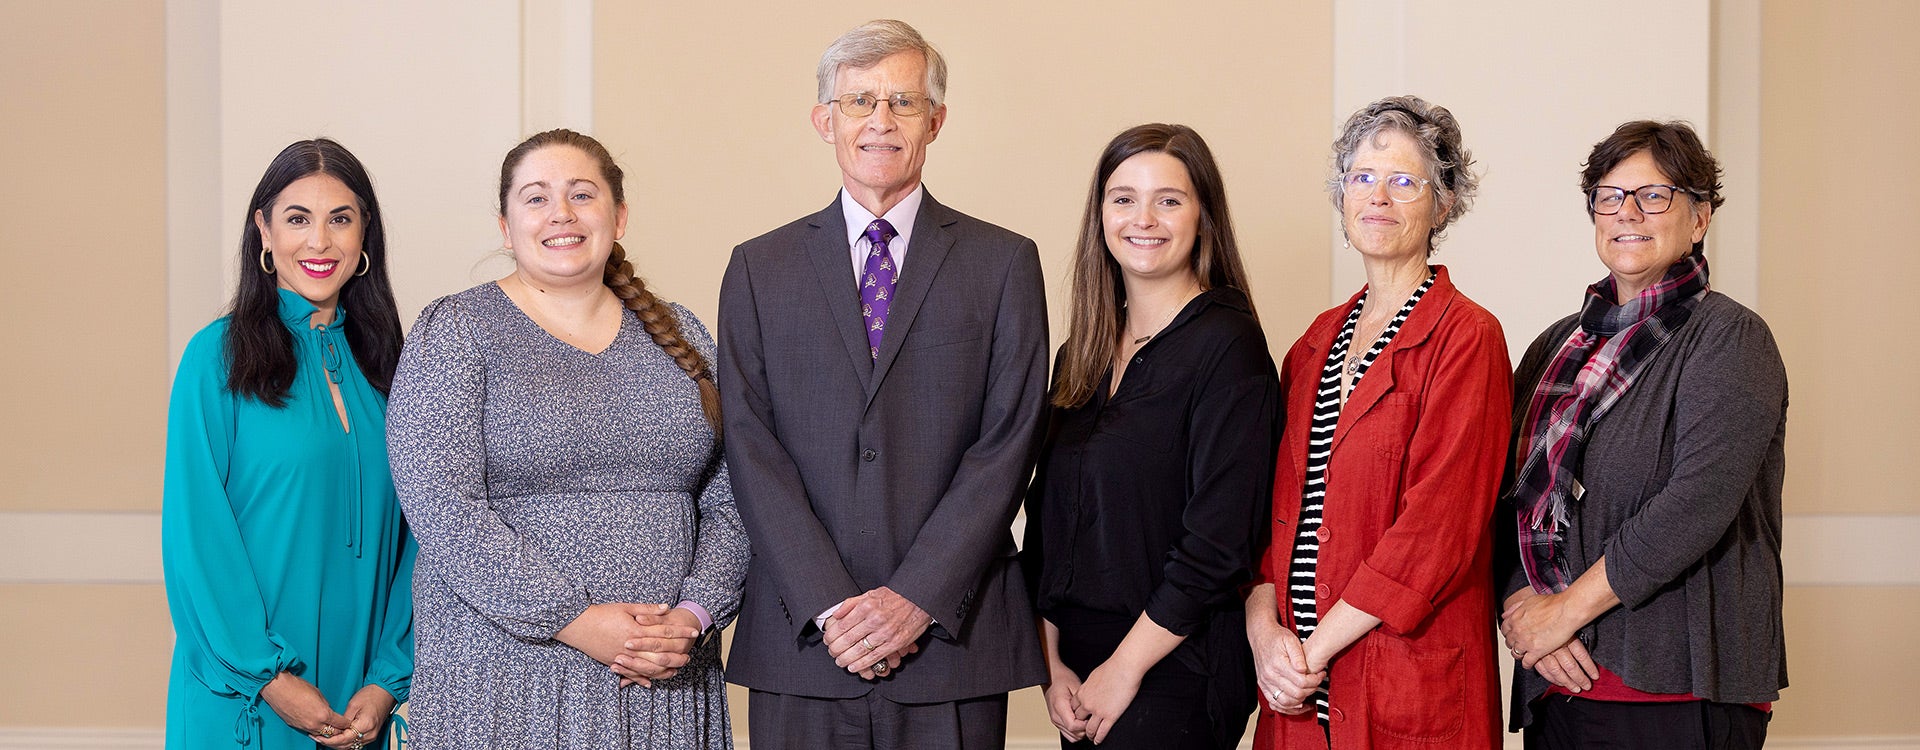 Dr. Skip Cummings’ team in the Brody School of Medicine’s public health department include, from left to right, Erica Taylor, Hannah Dail-Barnett, Courtney Klinger, Jill Jennings and Kristina Simeonsson.